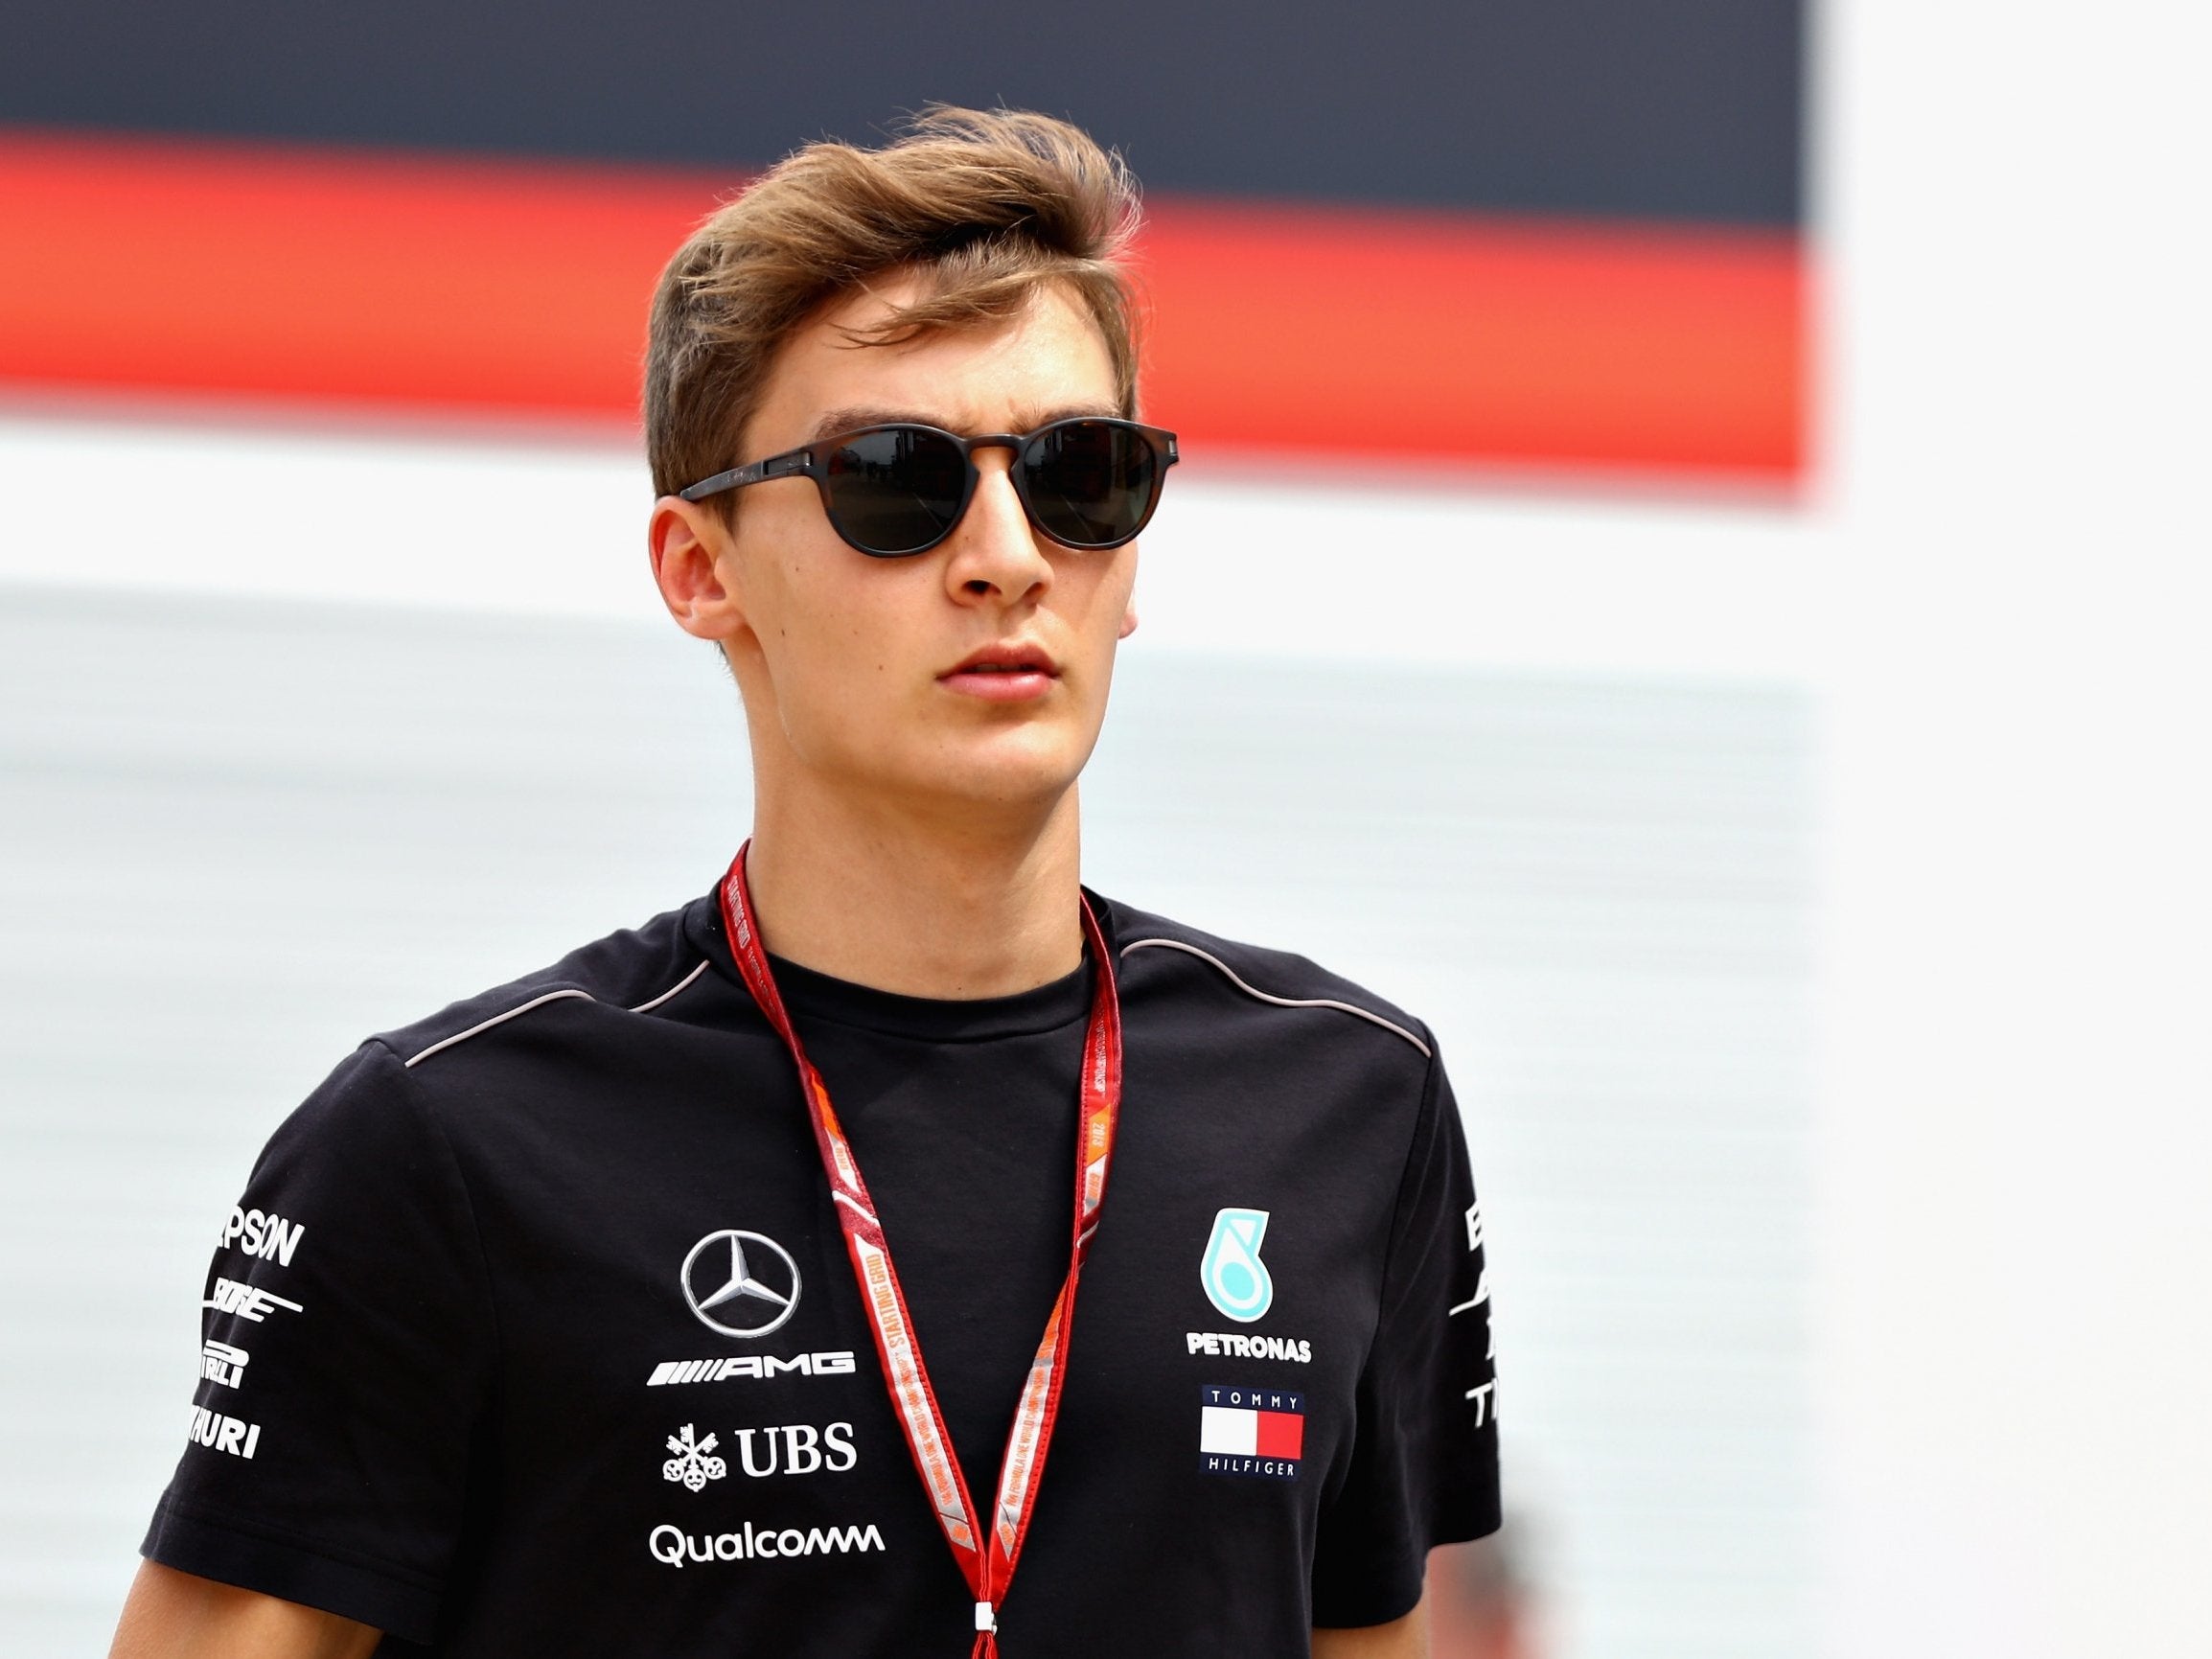 The young Englishman boasts an impressive record in motor racing’s junior categories